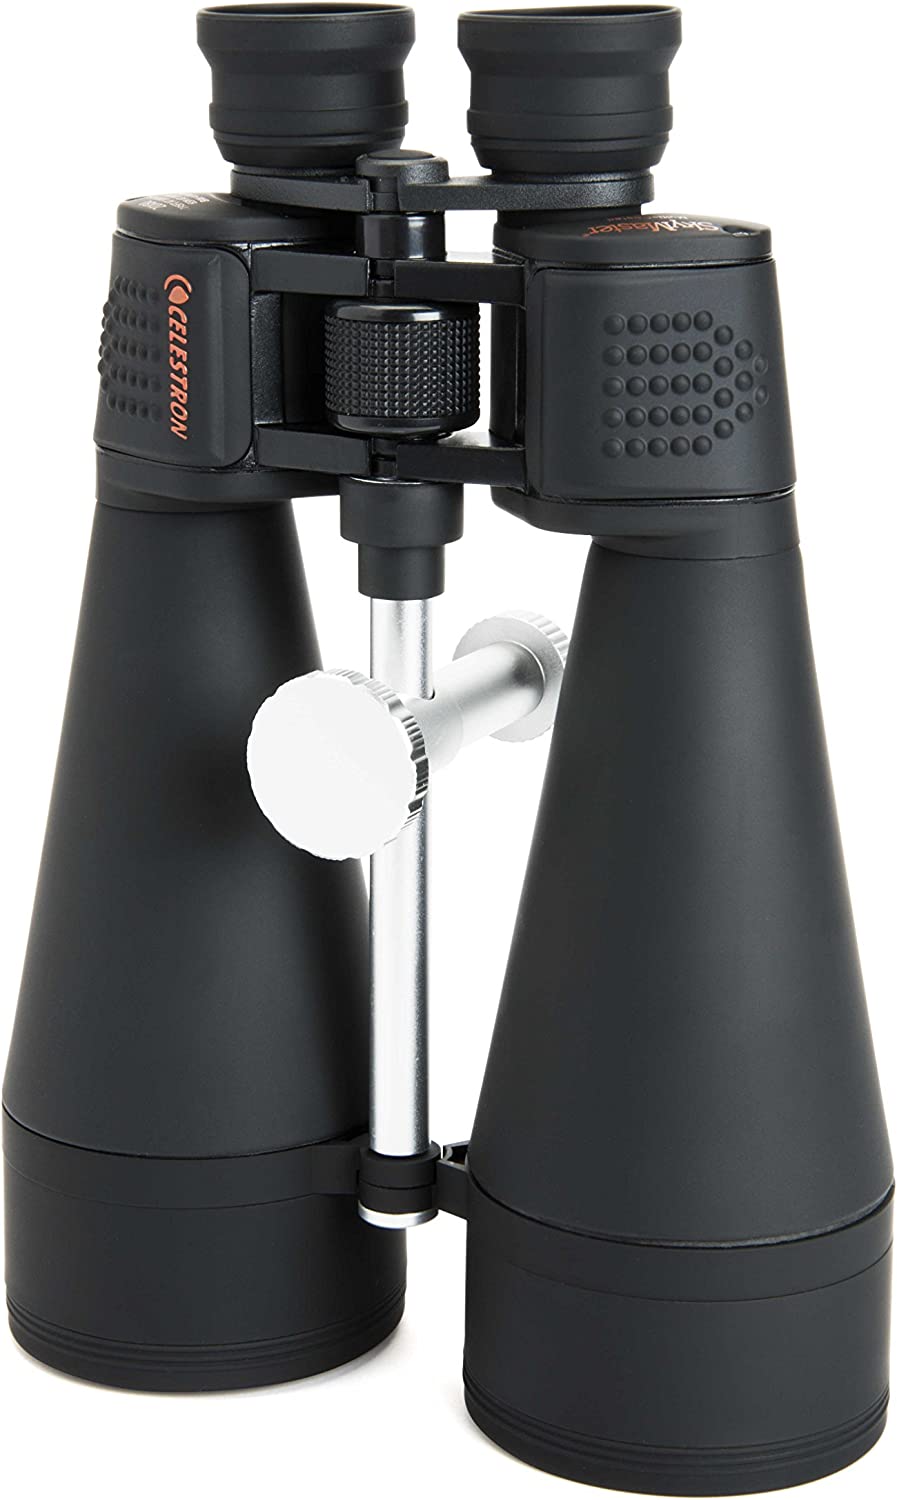 Celestron – SkyMaster 25X100 Binocular – Outdoor and Astronomy Binoculars – Powerful 25x Magnification – Giant Aperture for Long Distance Viewing – Multi-coated Optics – Carrying Case Included